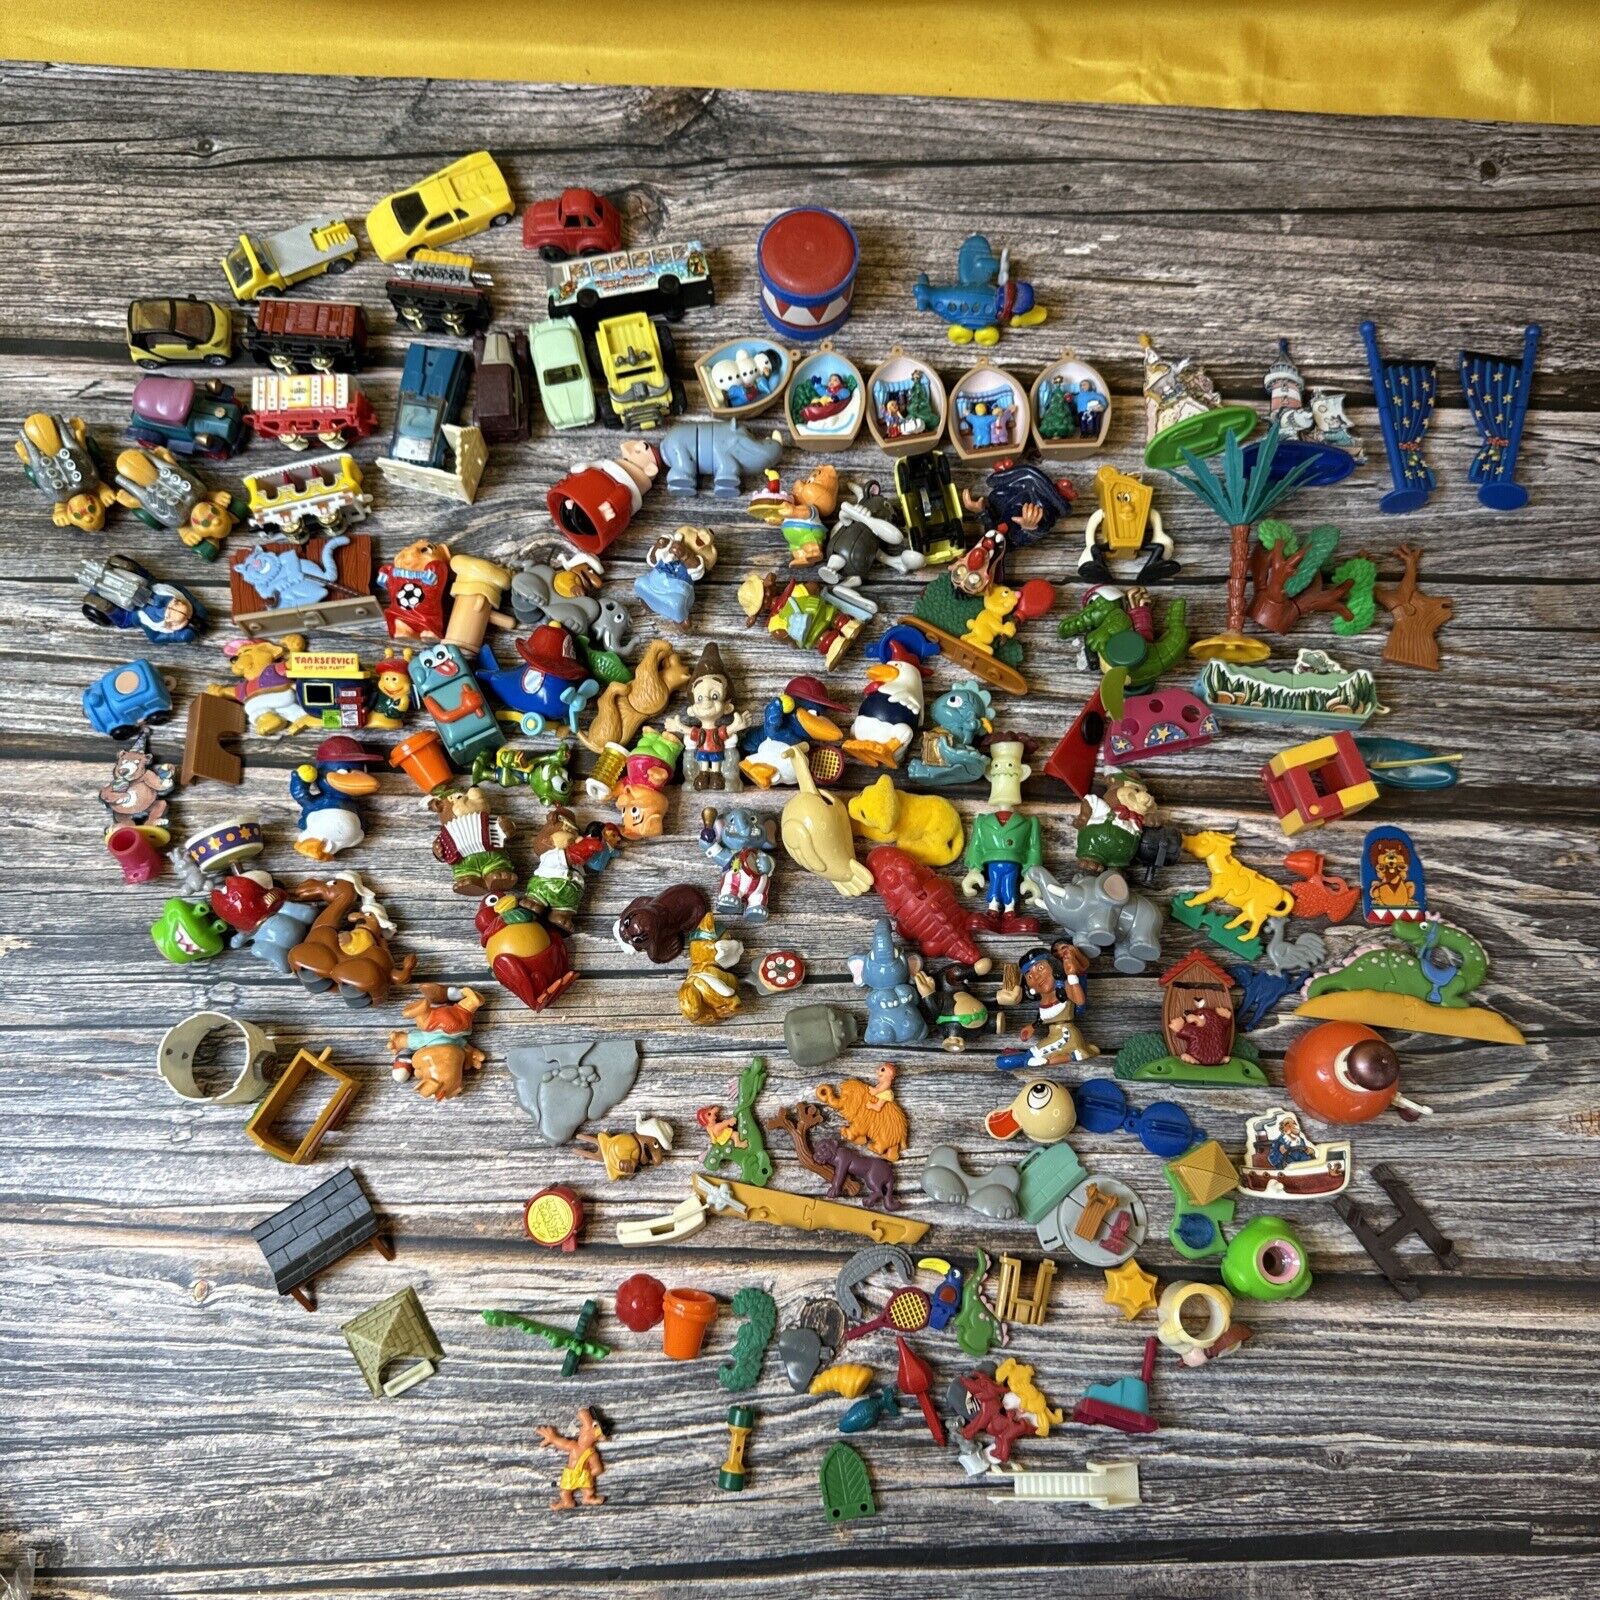 Vintage Large Lot Of Kinder Surprise International Toys Photography Cycling 140